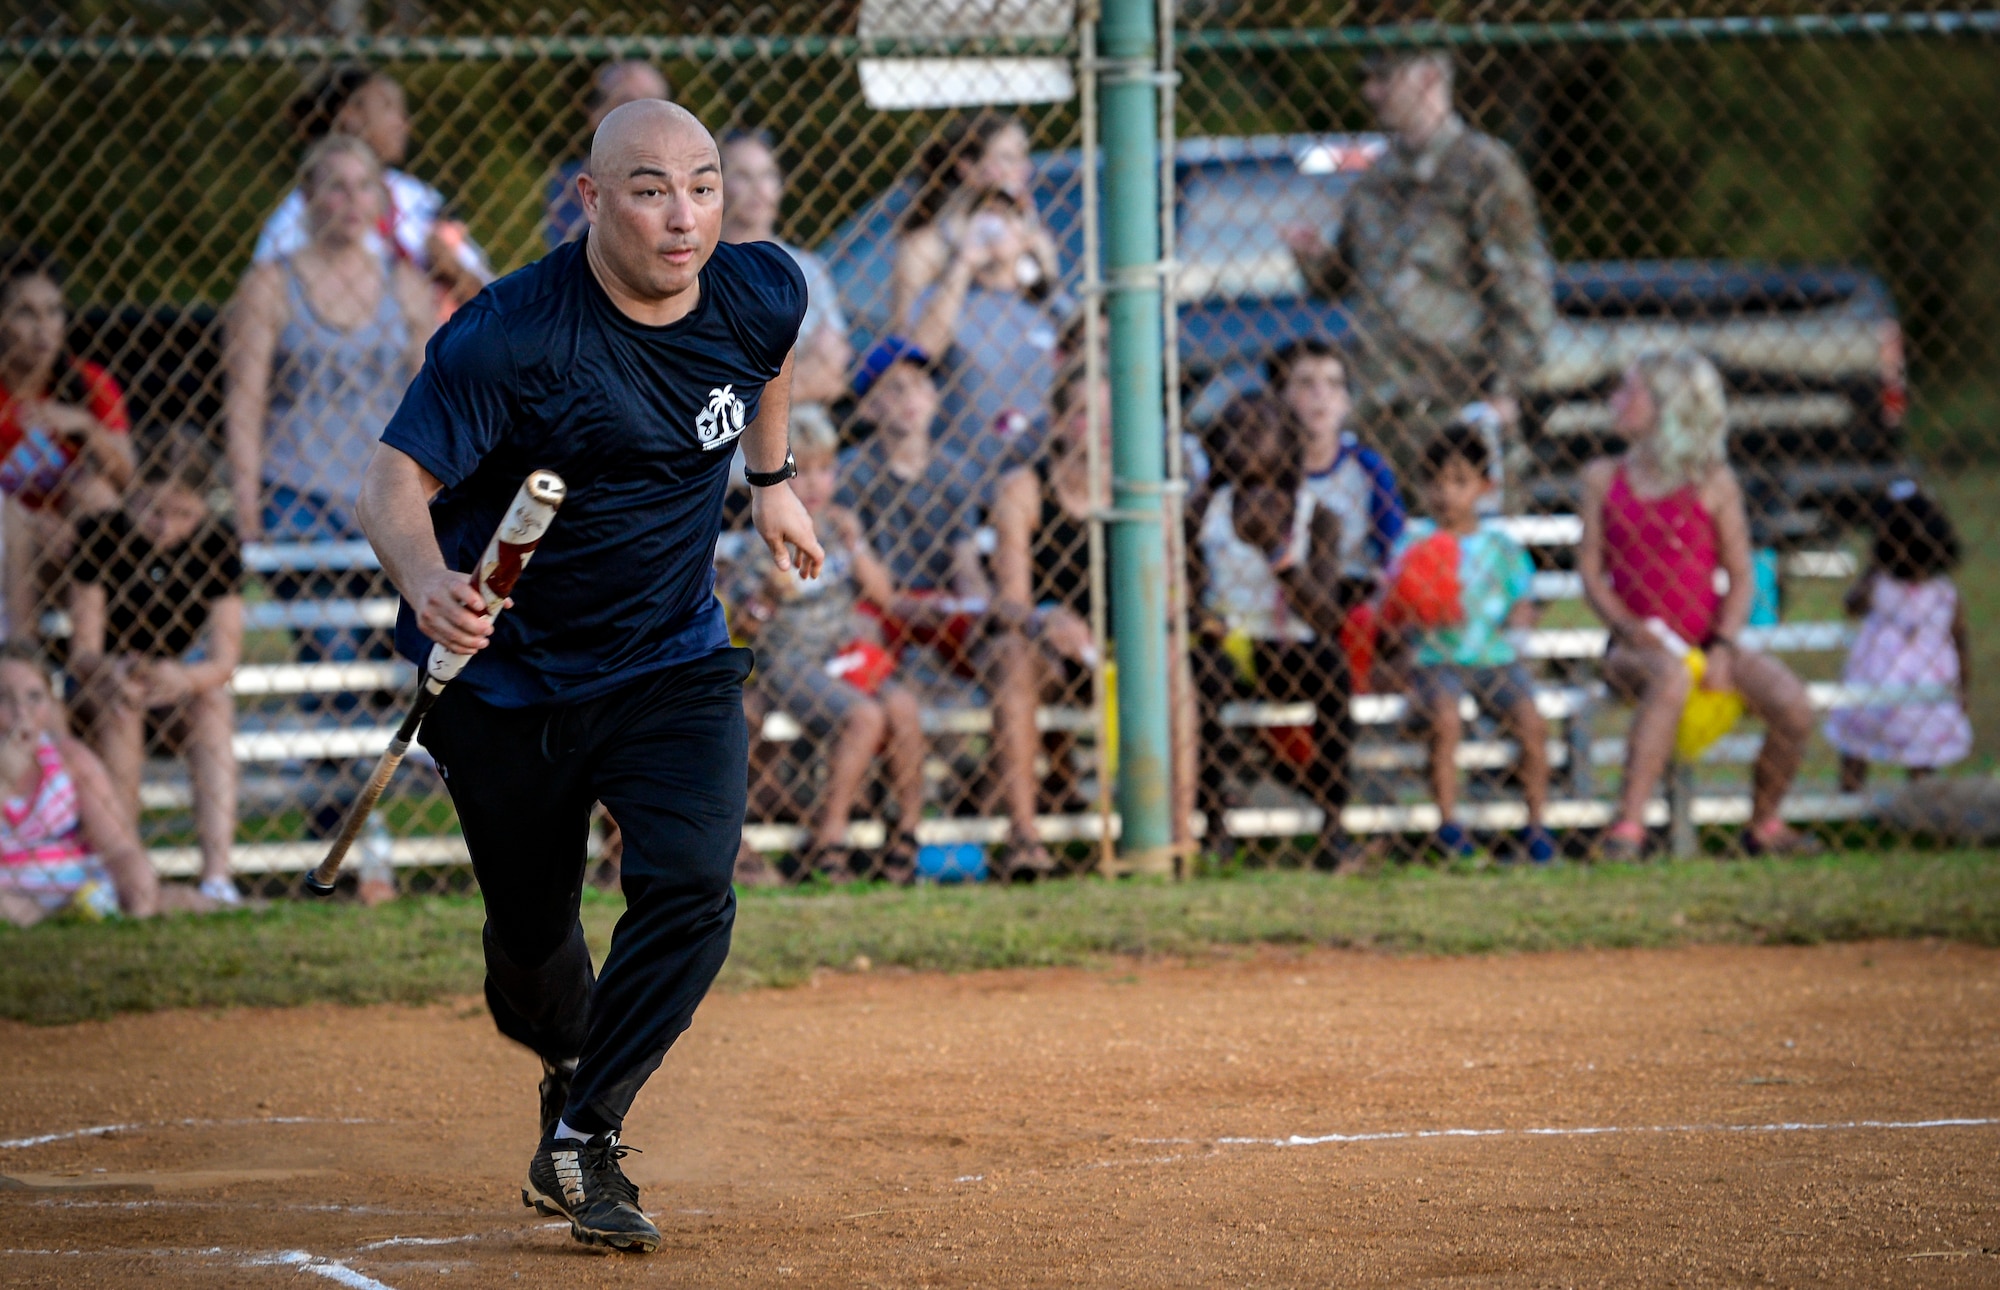 U.S. Air Force Chief Master Sgt. John Payne, 36th Wing command chief, runs to first base during the Chief’s versus Eagle’s softball game at Andersen Air Force Base, Guam, June 18, 2021.